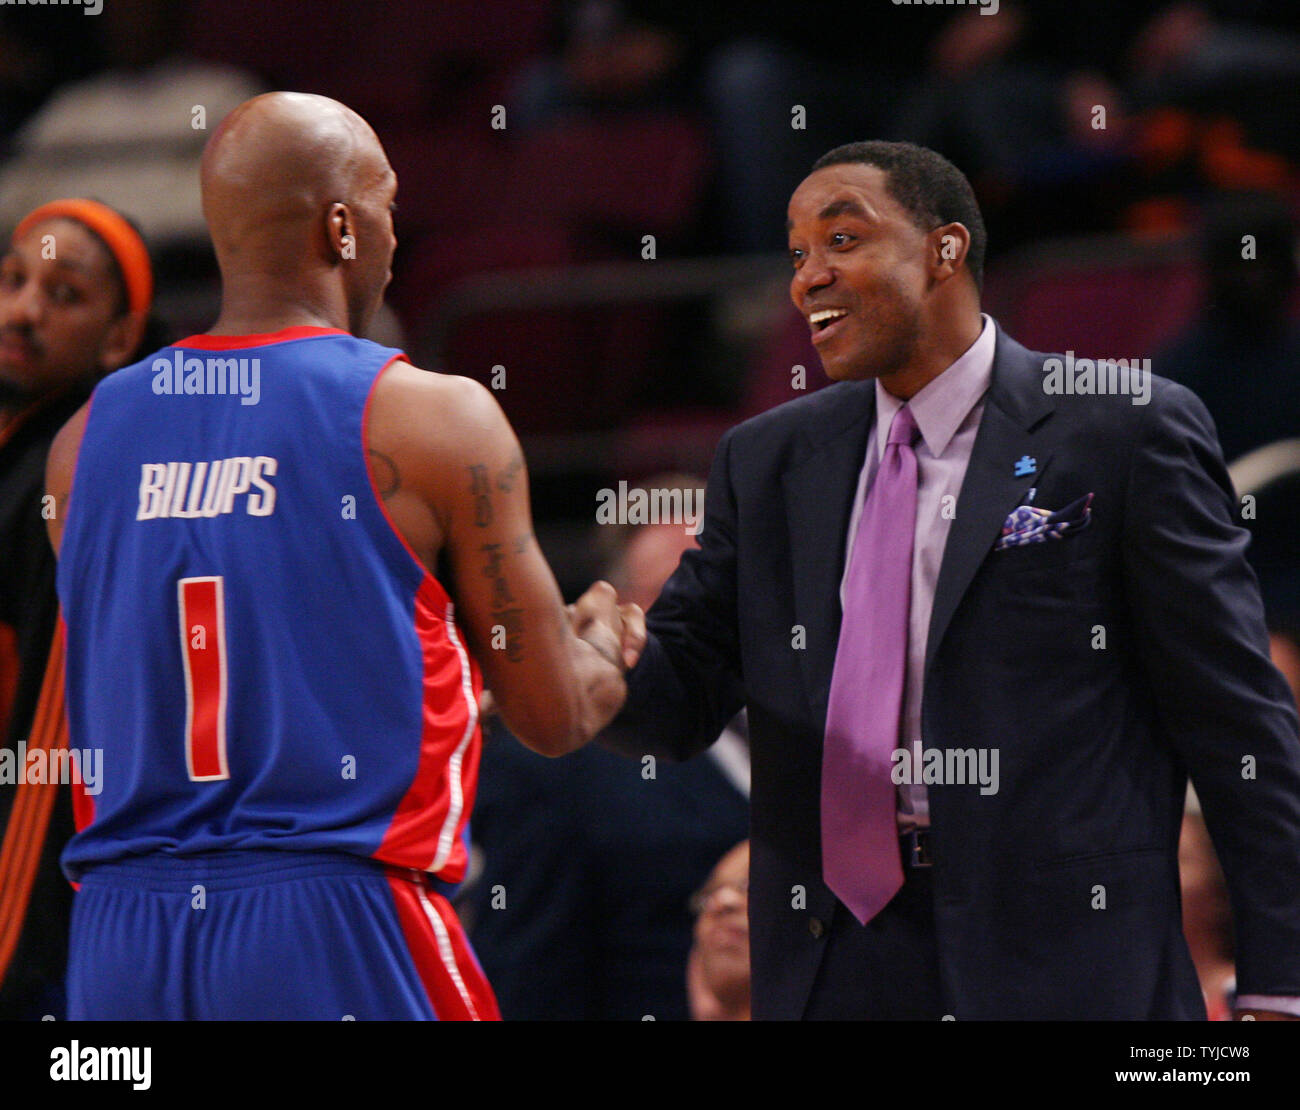 New York Knicks head coach Isiah Thomas greets Detroit Pistons Chauncey Billups before the game at at Madison Square Garden in New York City on January 13, 2008. The Knicks defeated the Pistons 89-65.      (UPI Photo/John Angelillo) Stock Photo